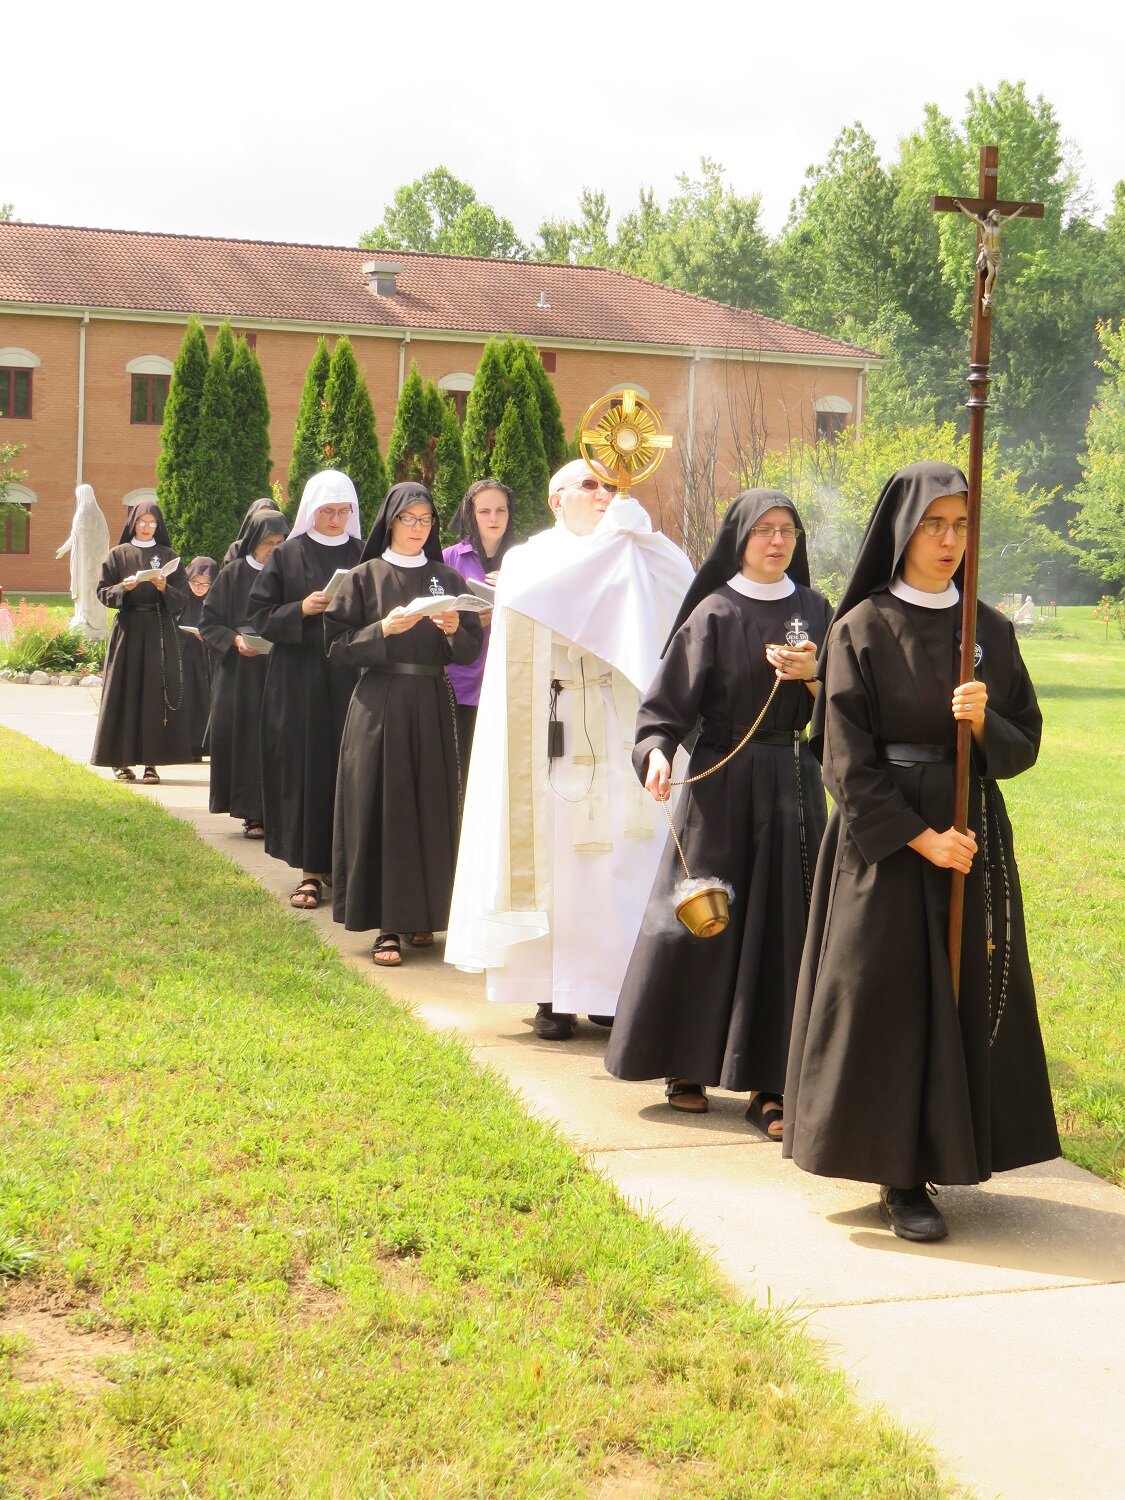  The procession passes through our cloistered courtyard 